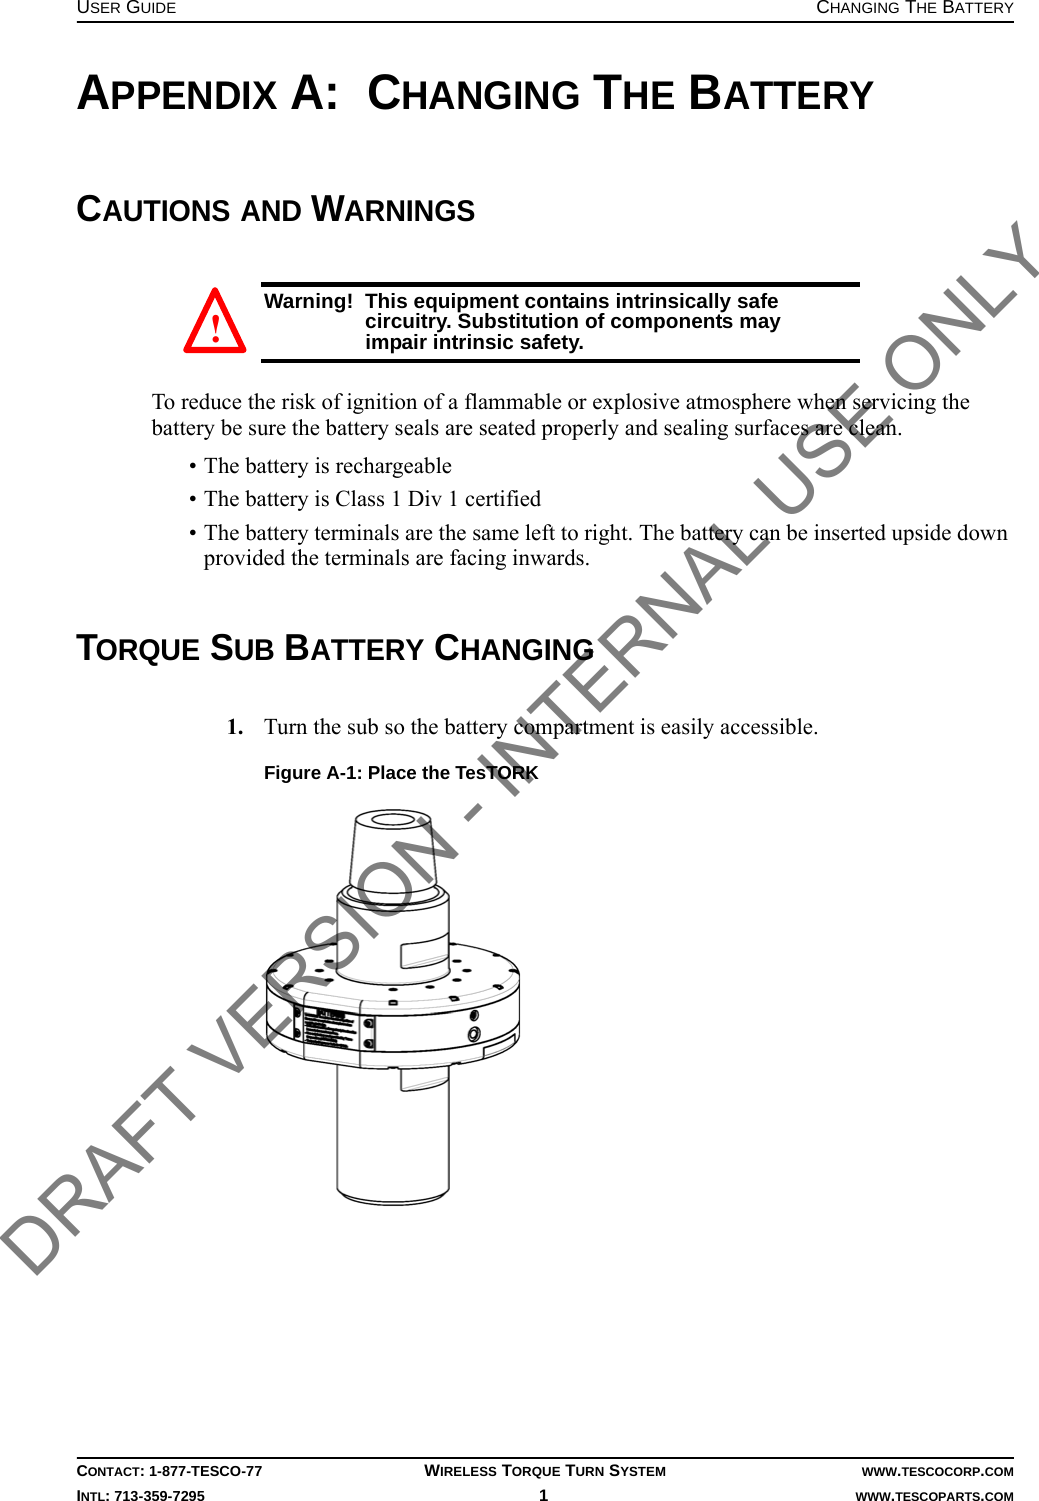 USER GUIDE CHANGING THE BATTERYCONTACT: 1-877-TESCO-77 WIRELESS TORQUE TURN SYSTEM WWW.TESCOCORP.COMINTL: 713-359-7295 1   WWW.TESCOPARTS.COMAPPENDIX A:  CHANGING THE BATTERYCAUTIONS AND WARNINGSWarning!  This equipment contains intrinsically safe circuitry. Substitution of components may impair intrinsic safety.To reduce the risk of ignition of a flammable or explosive atmosphere when servicing the battery be sure the battery seals are seated properly and sealing surfaces are clean.• The battery is rechargeable• The battery is Class 1 Div 1 certified• The battery terminals are the same left to right. The battery can be inserted upside down provided the terminals are facing inwards.TORQUE SUB BATTERY CHANGING1. Turn the sub so the battery compartment is easily accessible.Figure A-1: Place the TesTORK! DRAFT VERSION - INTERNAL USE ONLY